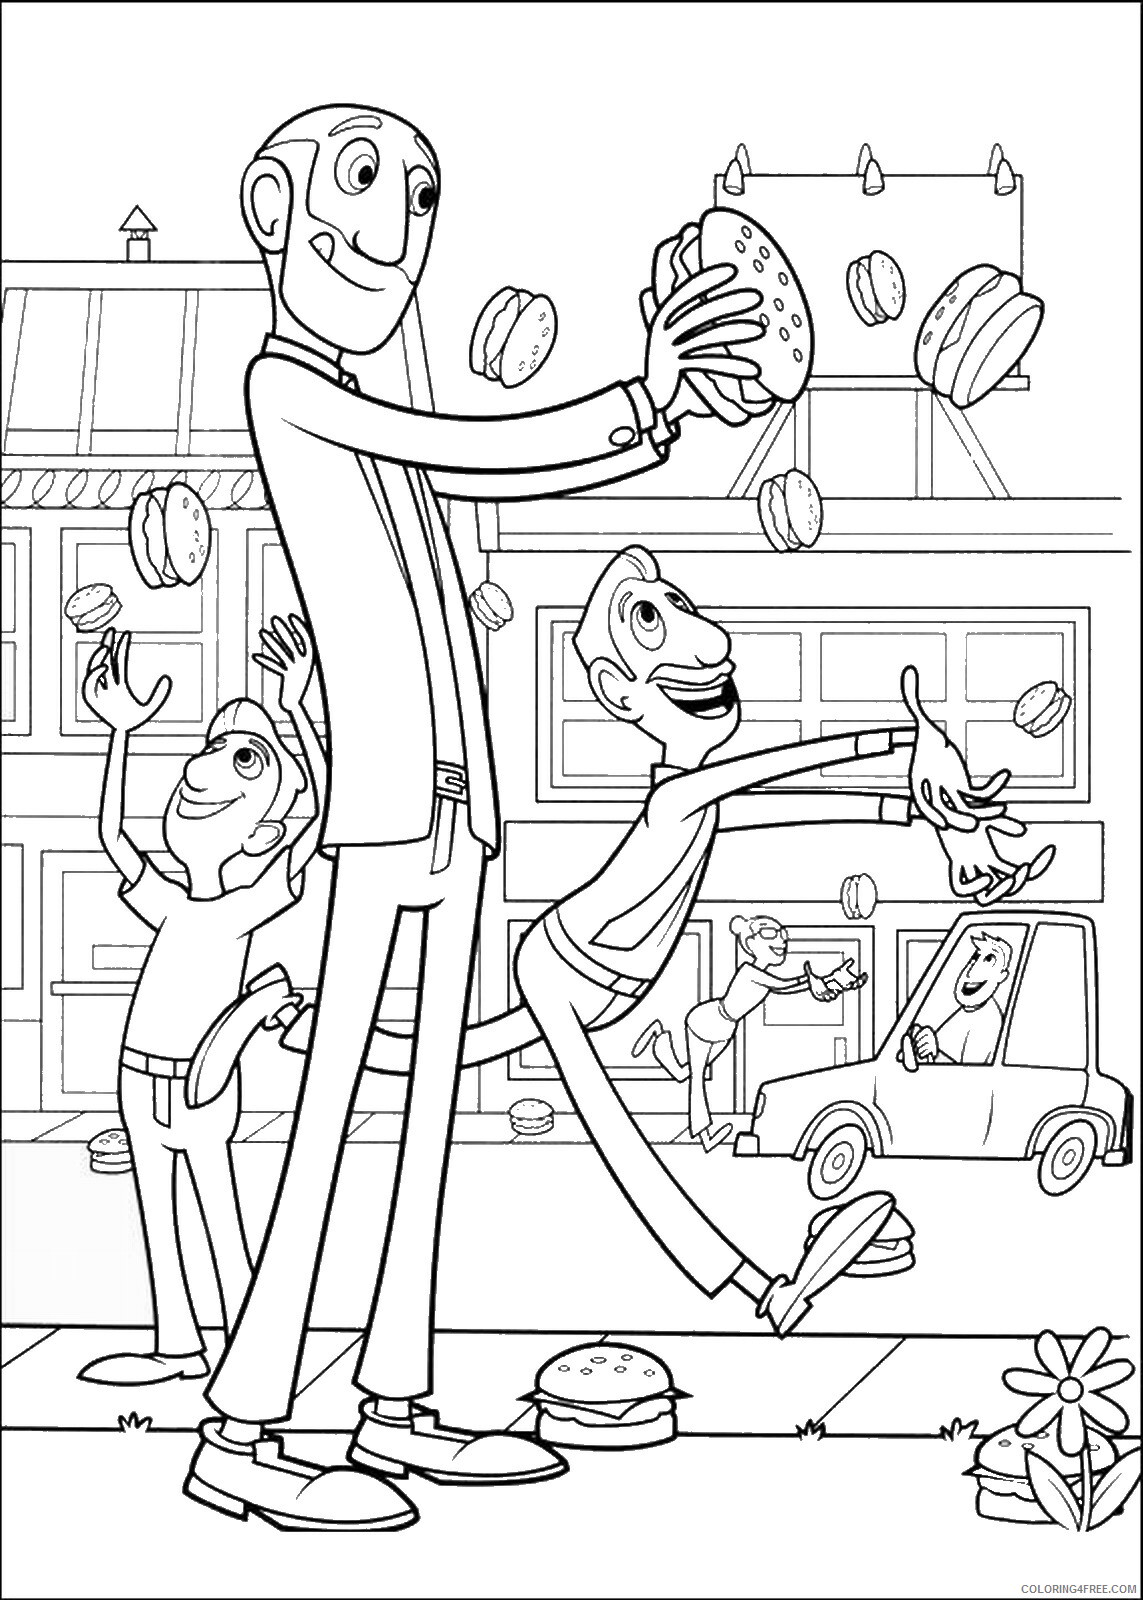 Cloudy with a Chance of Meatballs Coloring Pages TV Film Printable 2020 02223 Coloring4free